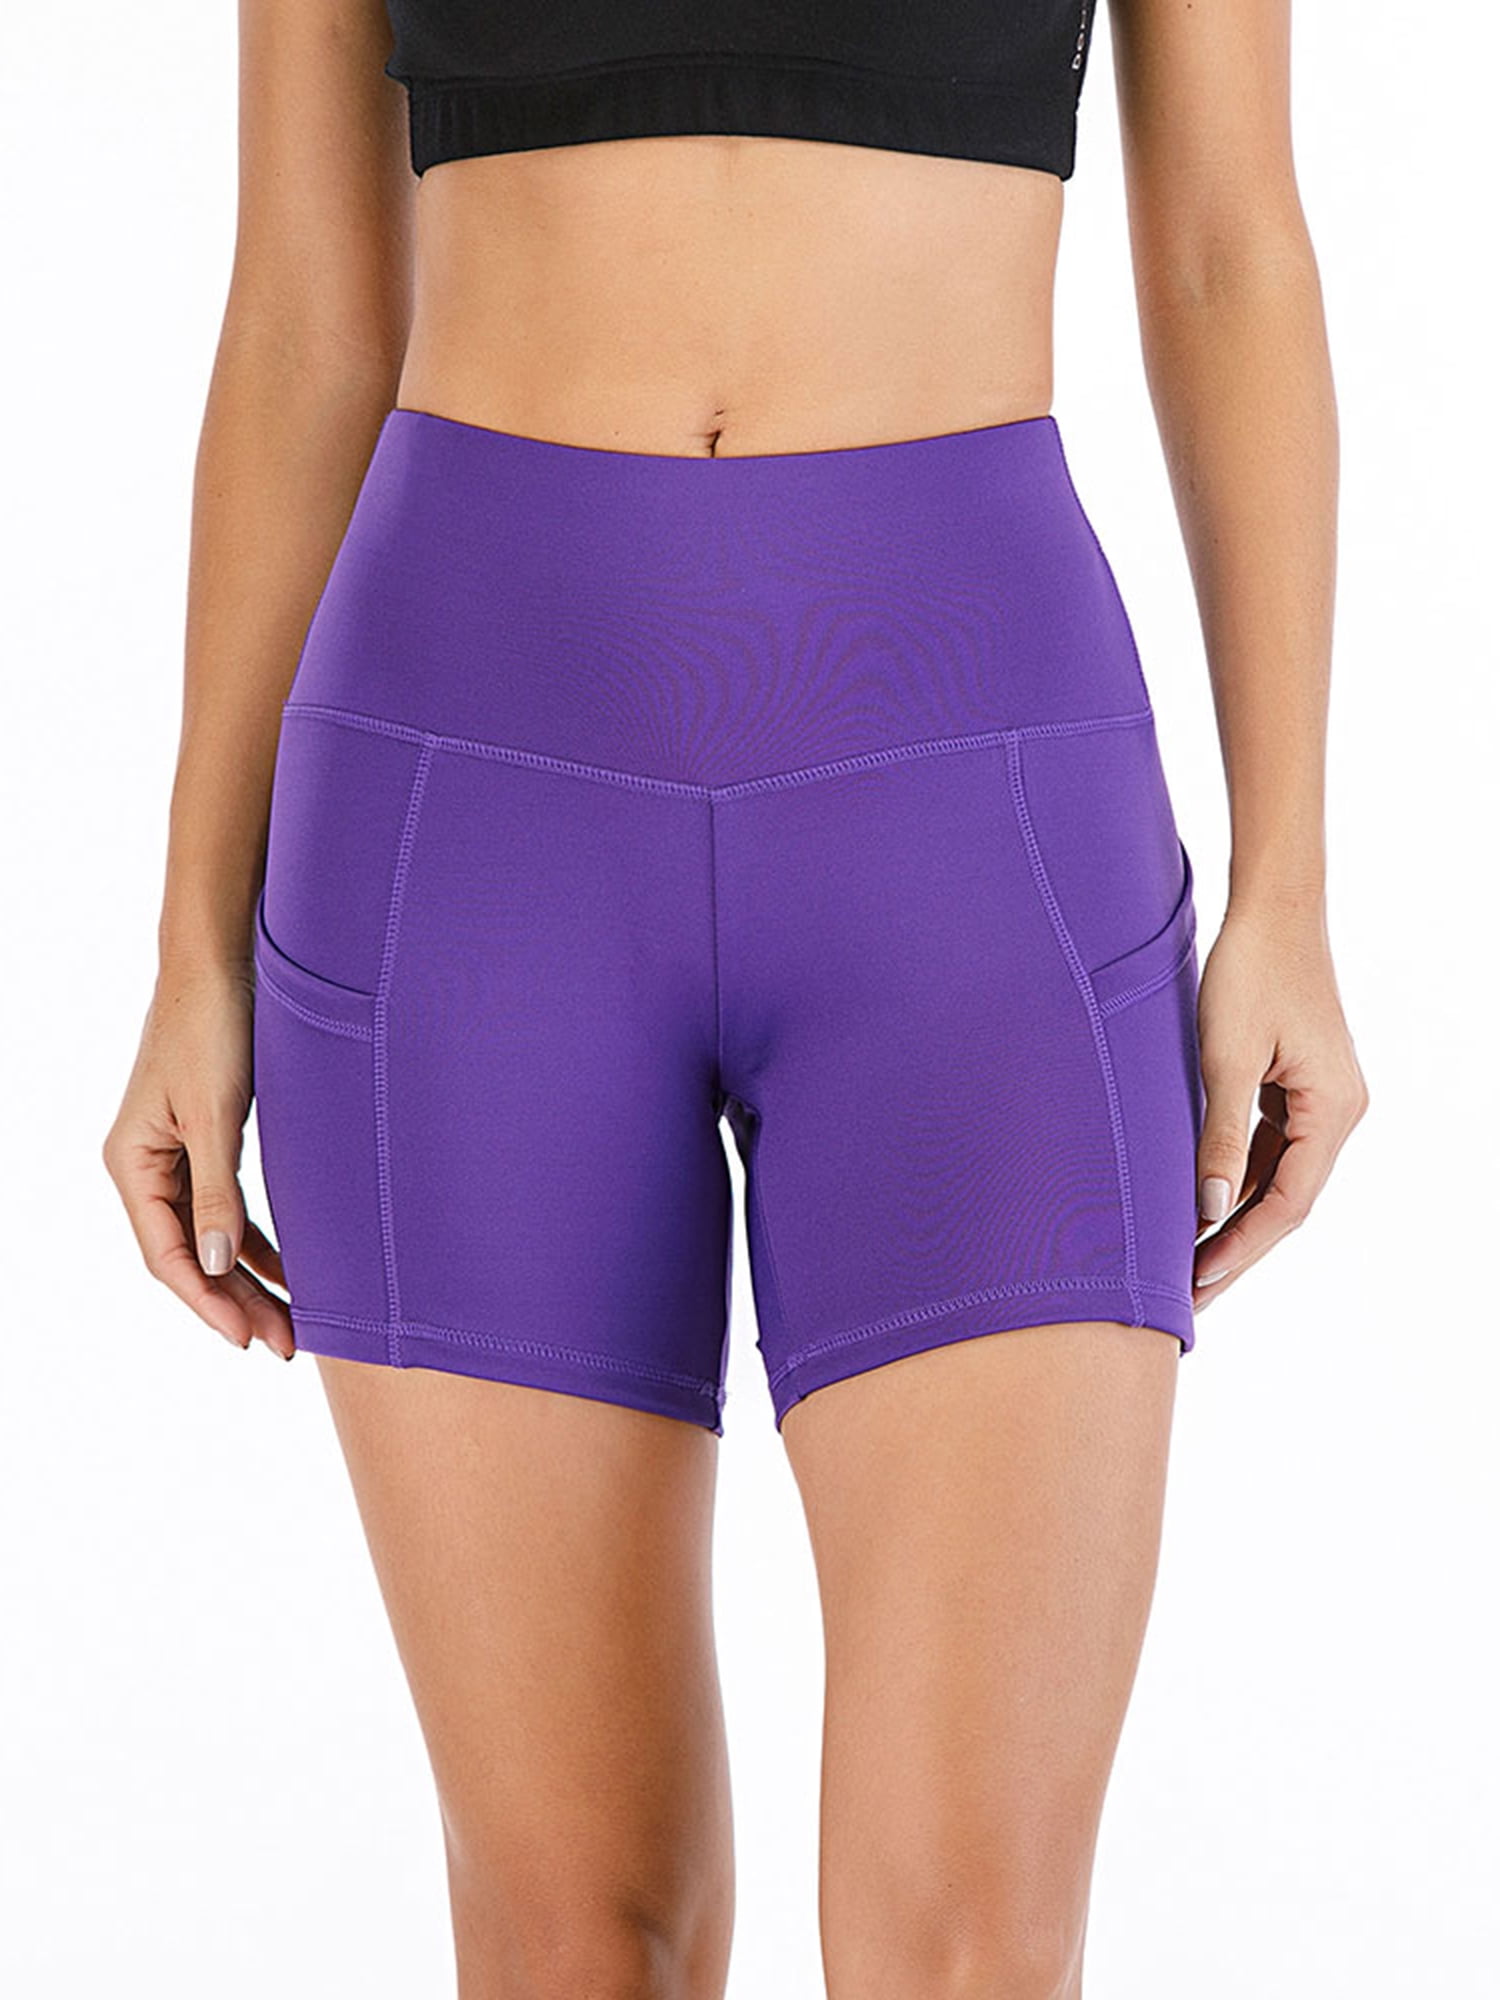 Women's High Waist Workout Yoga Running Compression Exercise Shorts Side Pockets 